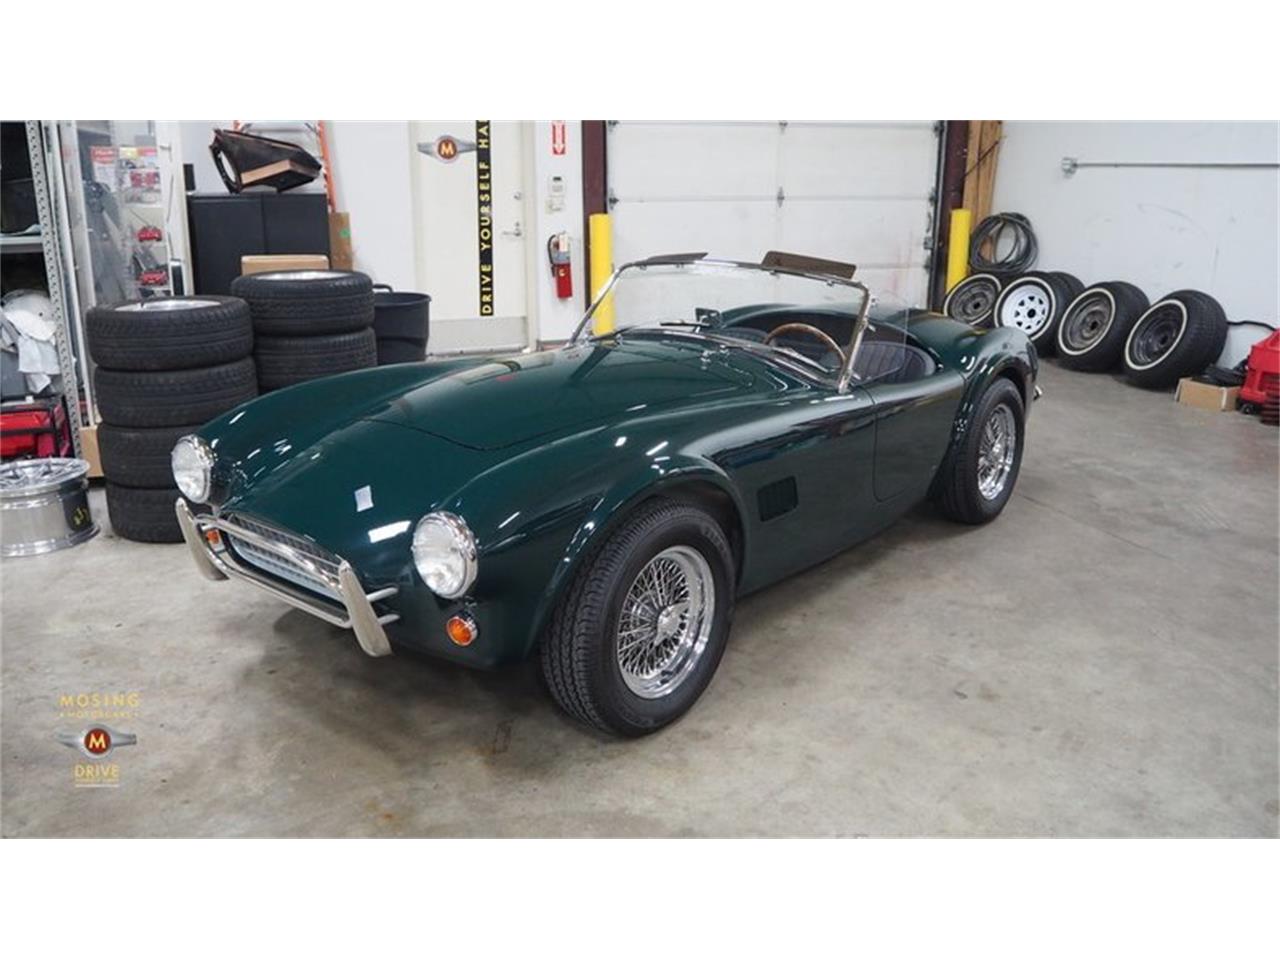 2016 Superformance MKII for sale in Austin, TX